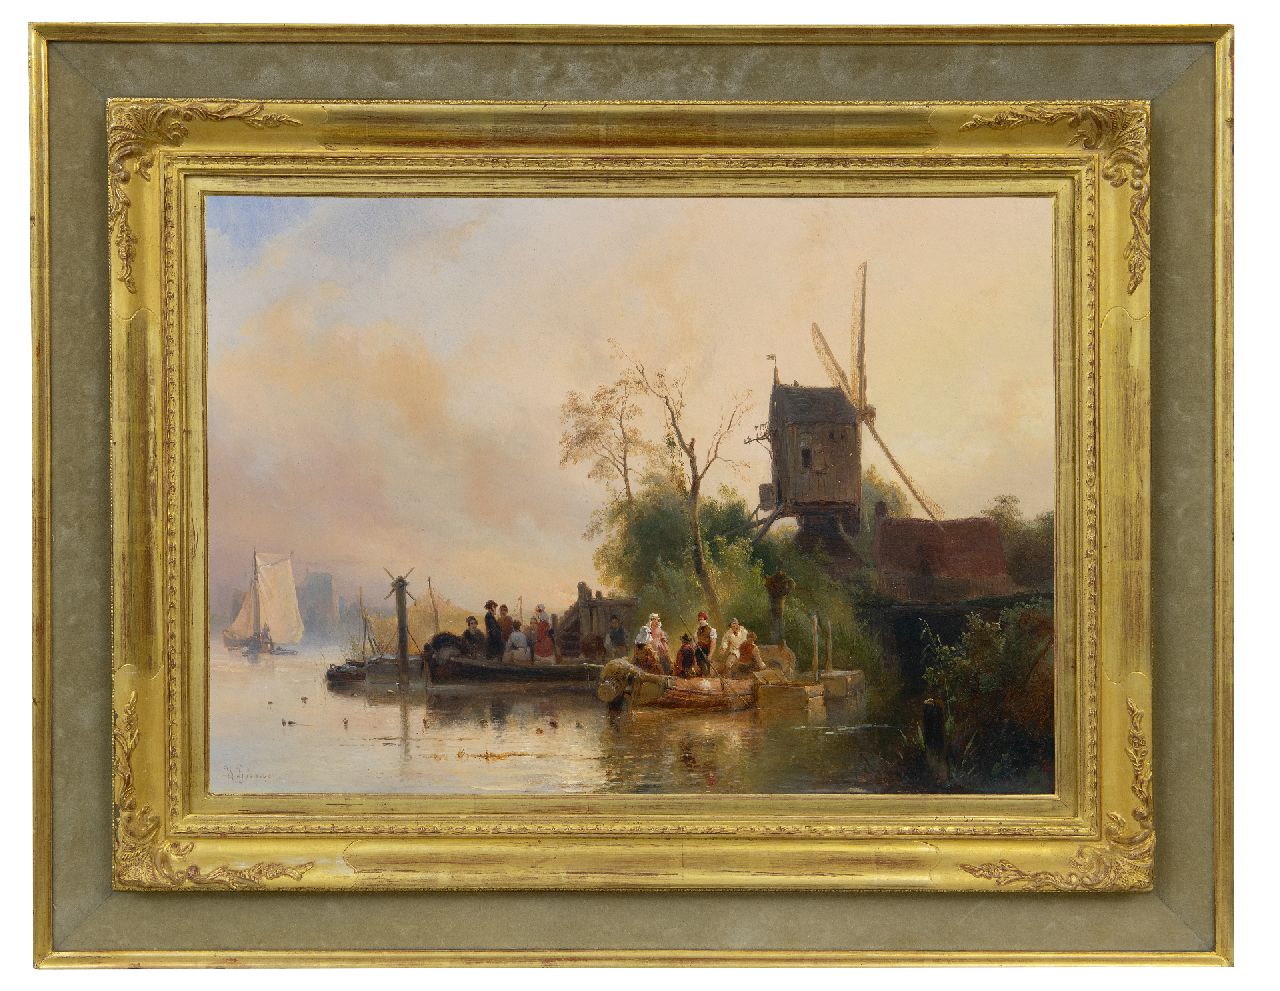 Nuijen W.J.J.  | Wijnandus Johannes Josephus 'Wijnand' Nuijen | Paintings offered for sale | Watermill and ferry, oil on panel 40.5 x 57.3 cm, signed l.l. and dated ca. 1835-1837